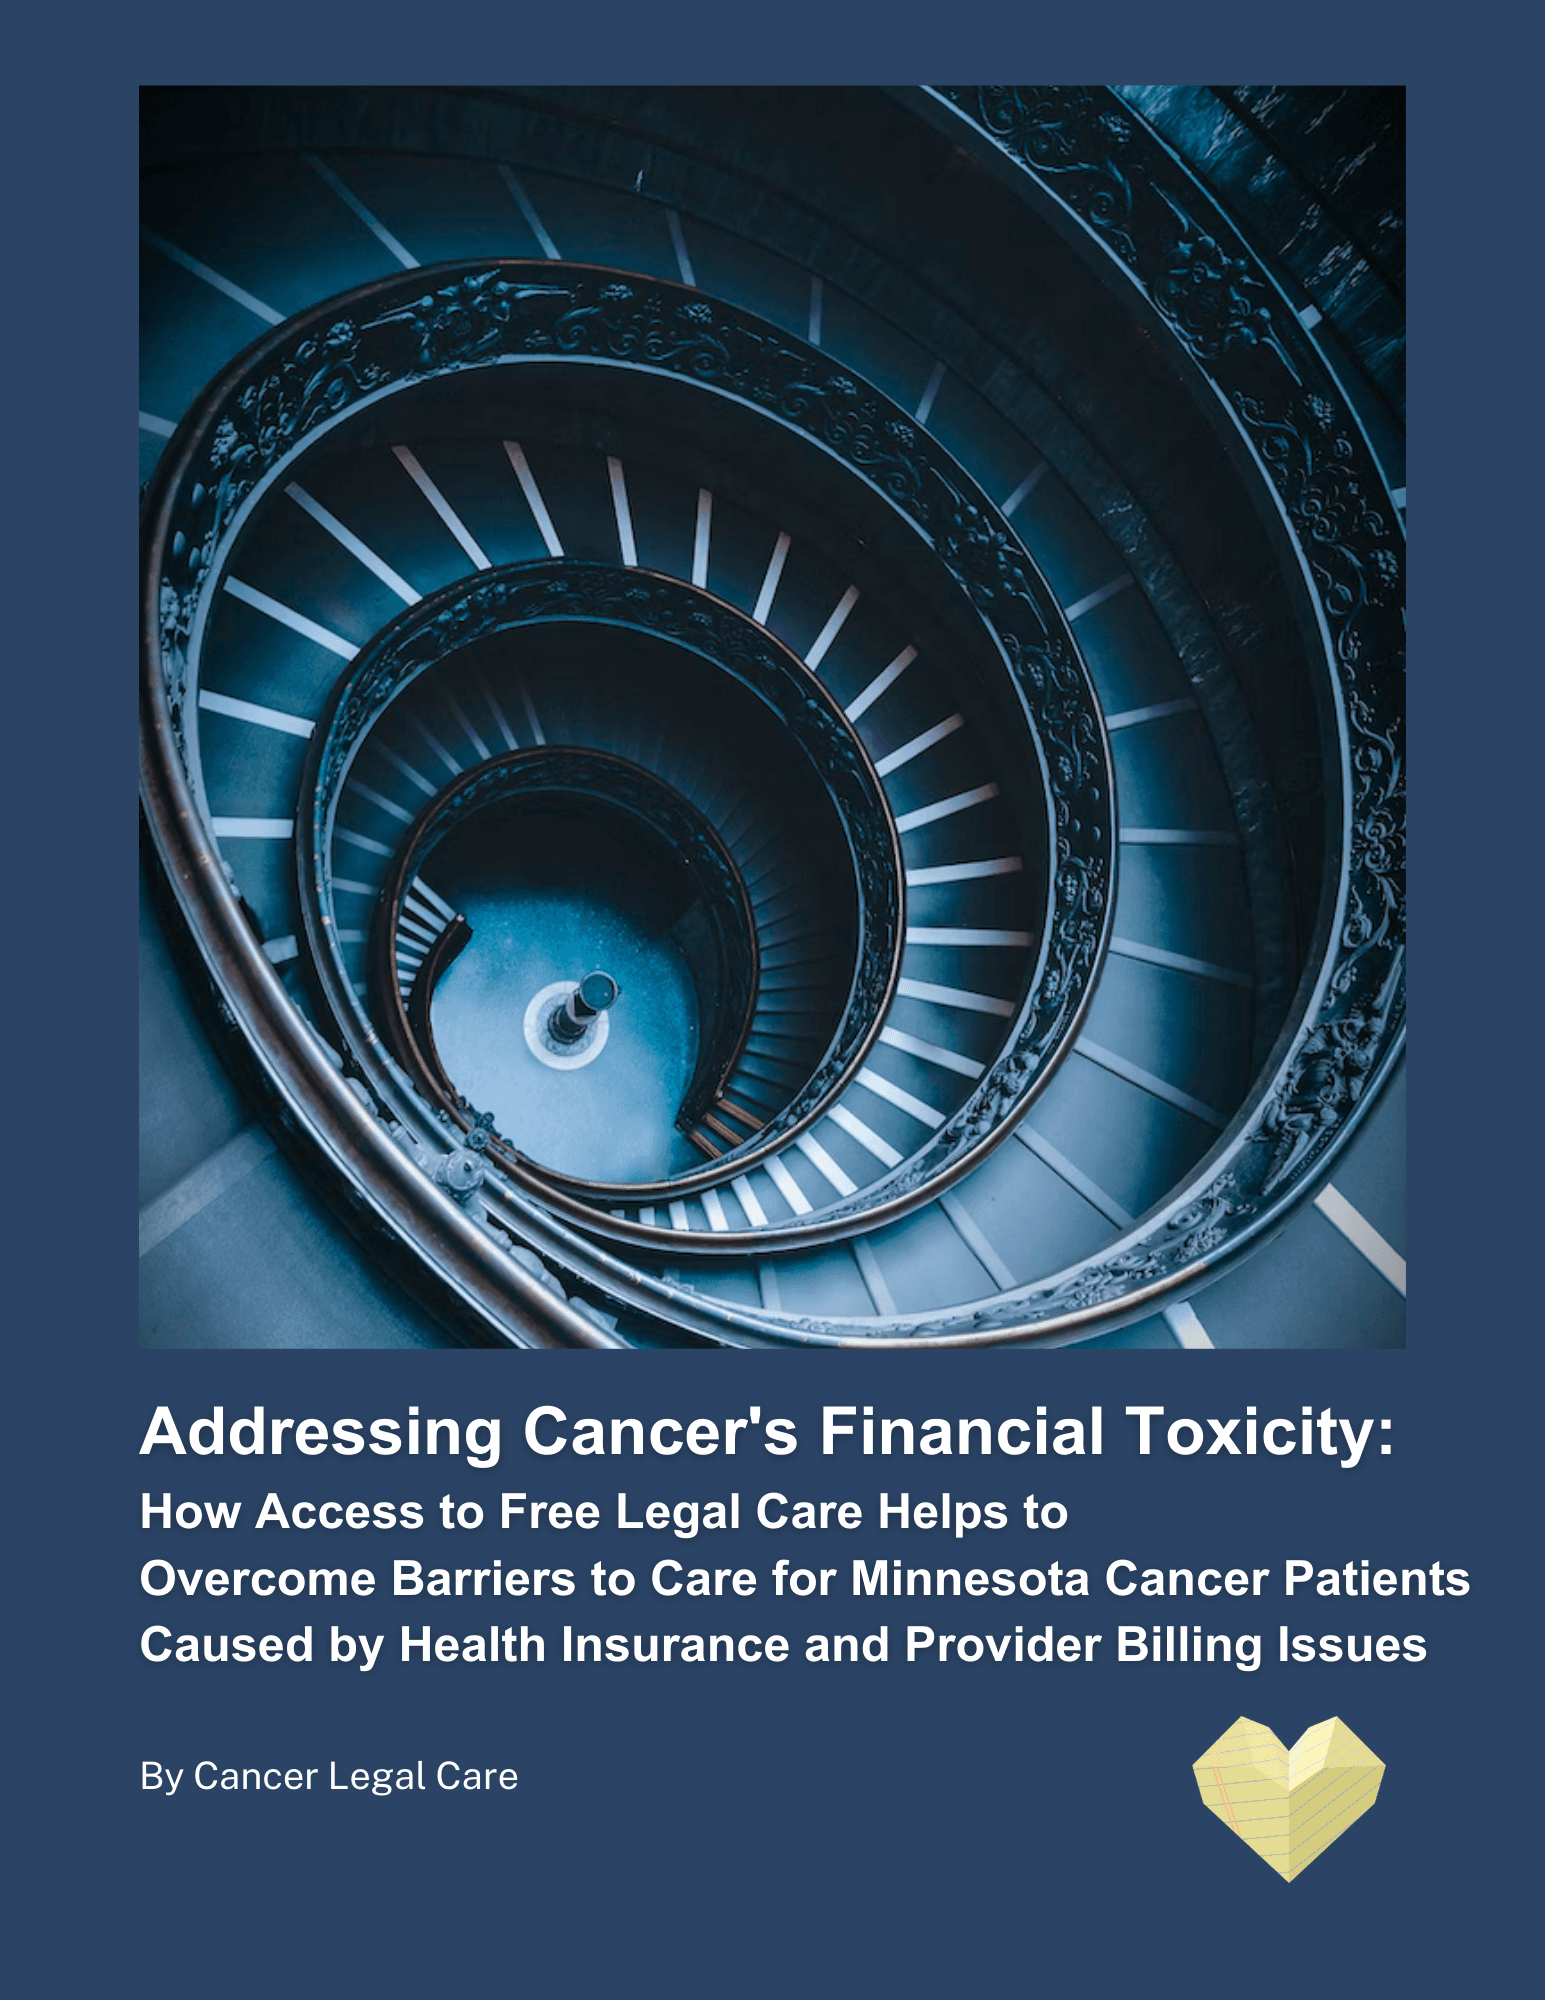 Addressing Cancer's Financial Toxicity: How Access to Free Legal Care Helps to Overcome Barriers to Care for Minnesota Cancer Patients Caused by Health Insurance and Provider Billing Issues